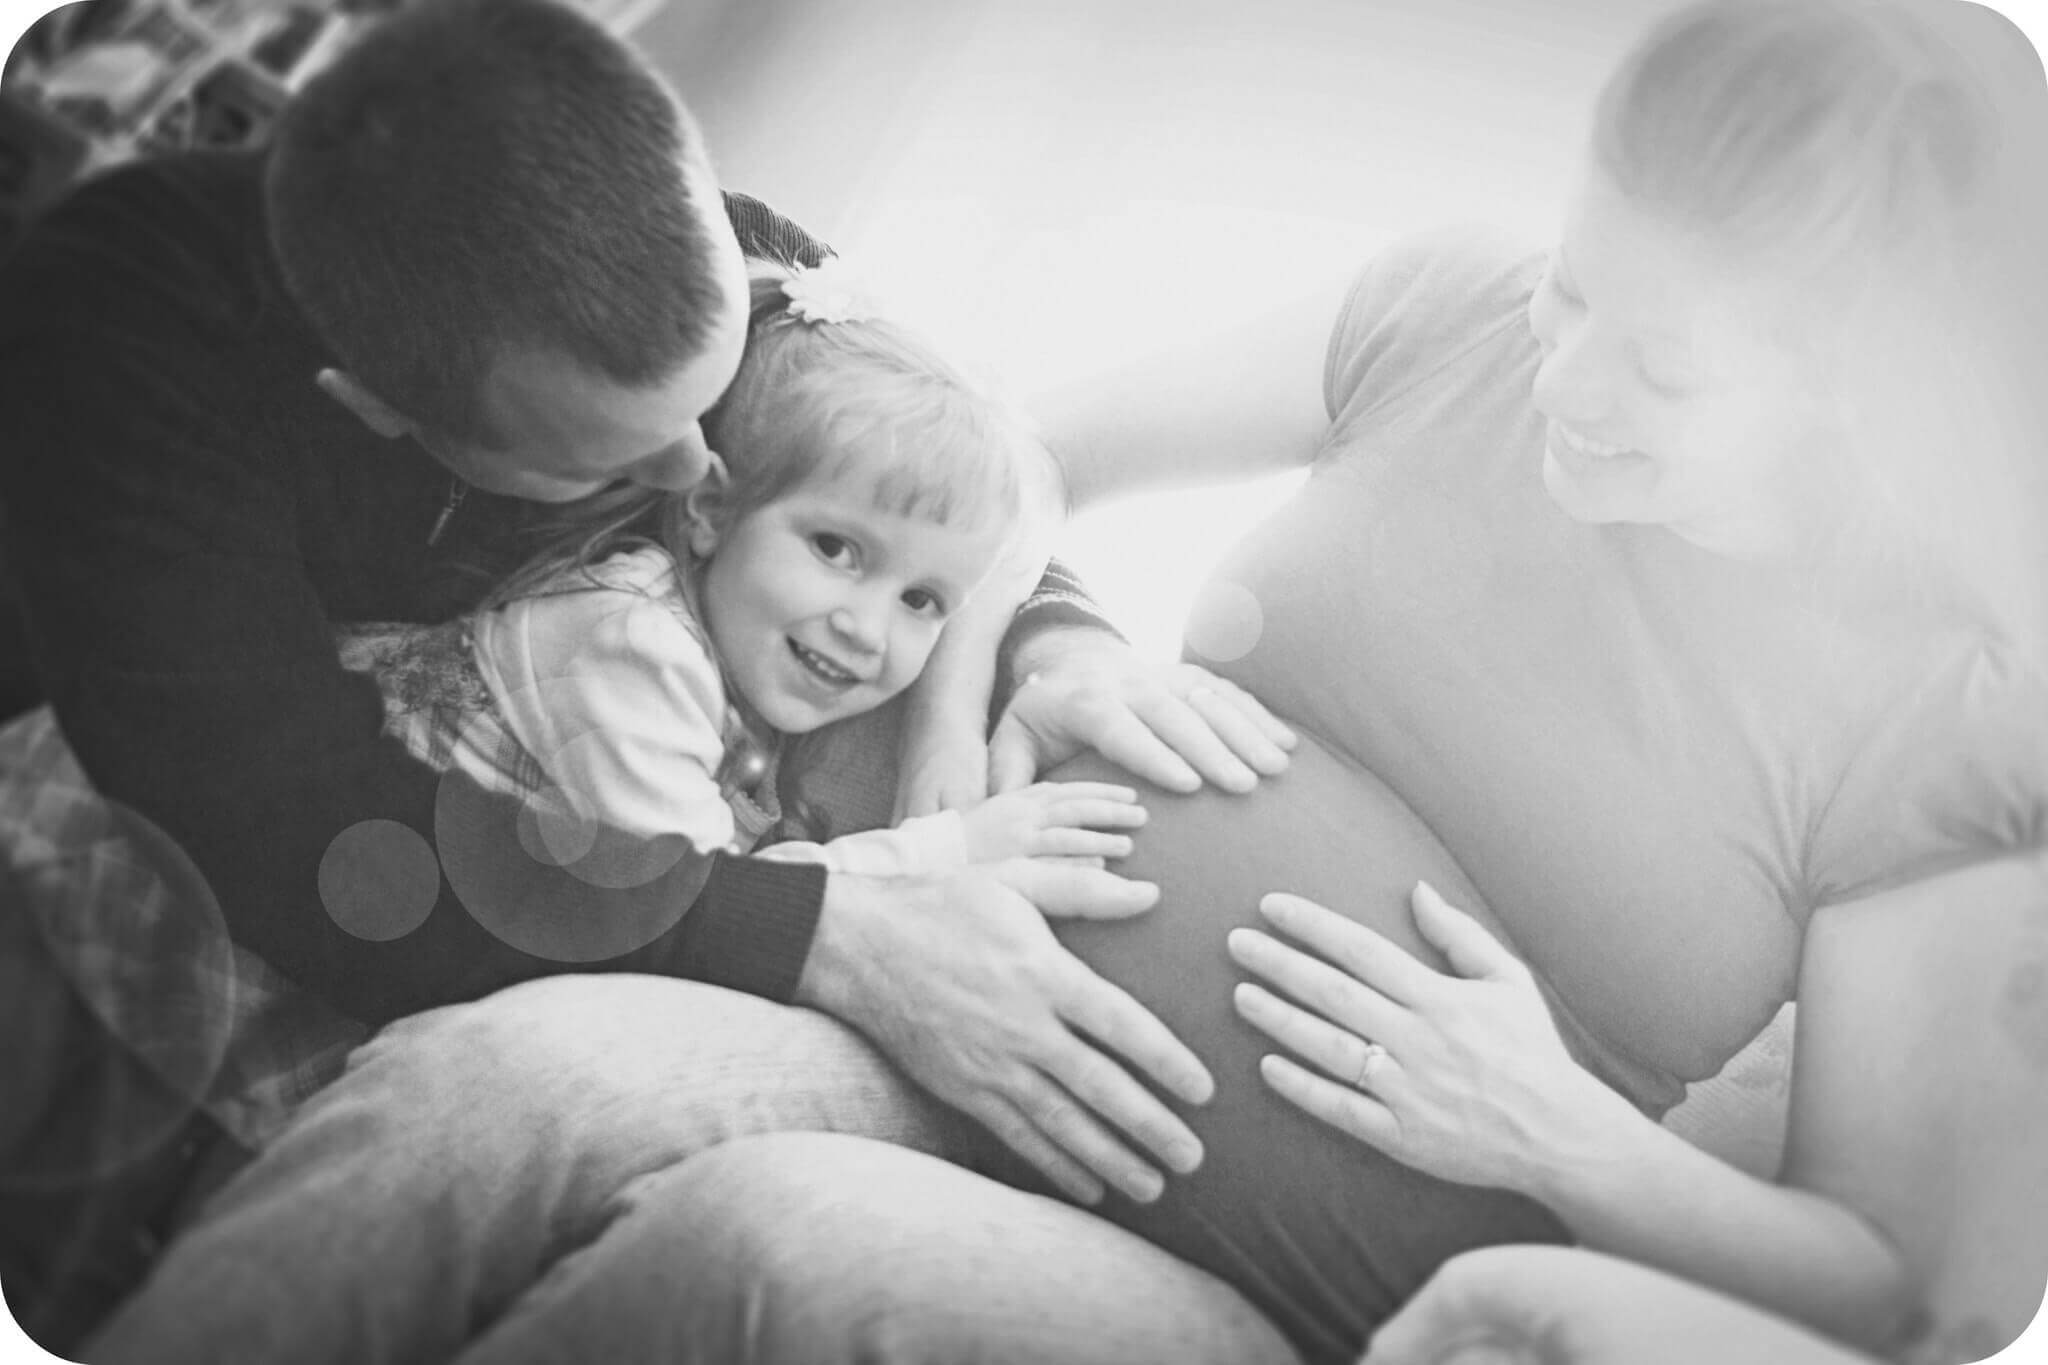 15 Tips for a More Enjoyable Pregnancy (from a soon-to-be mom of 5)